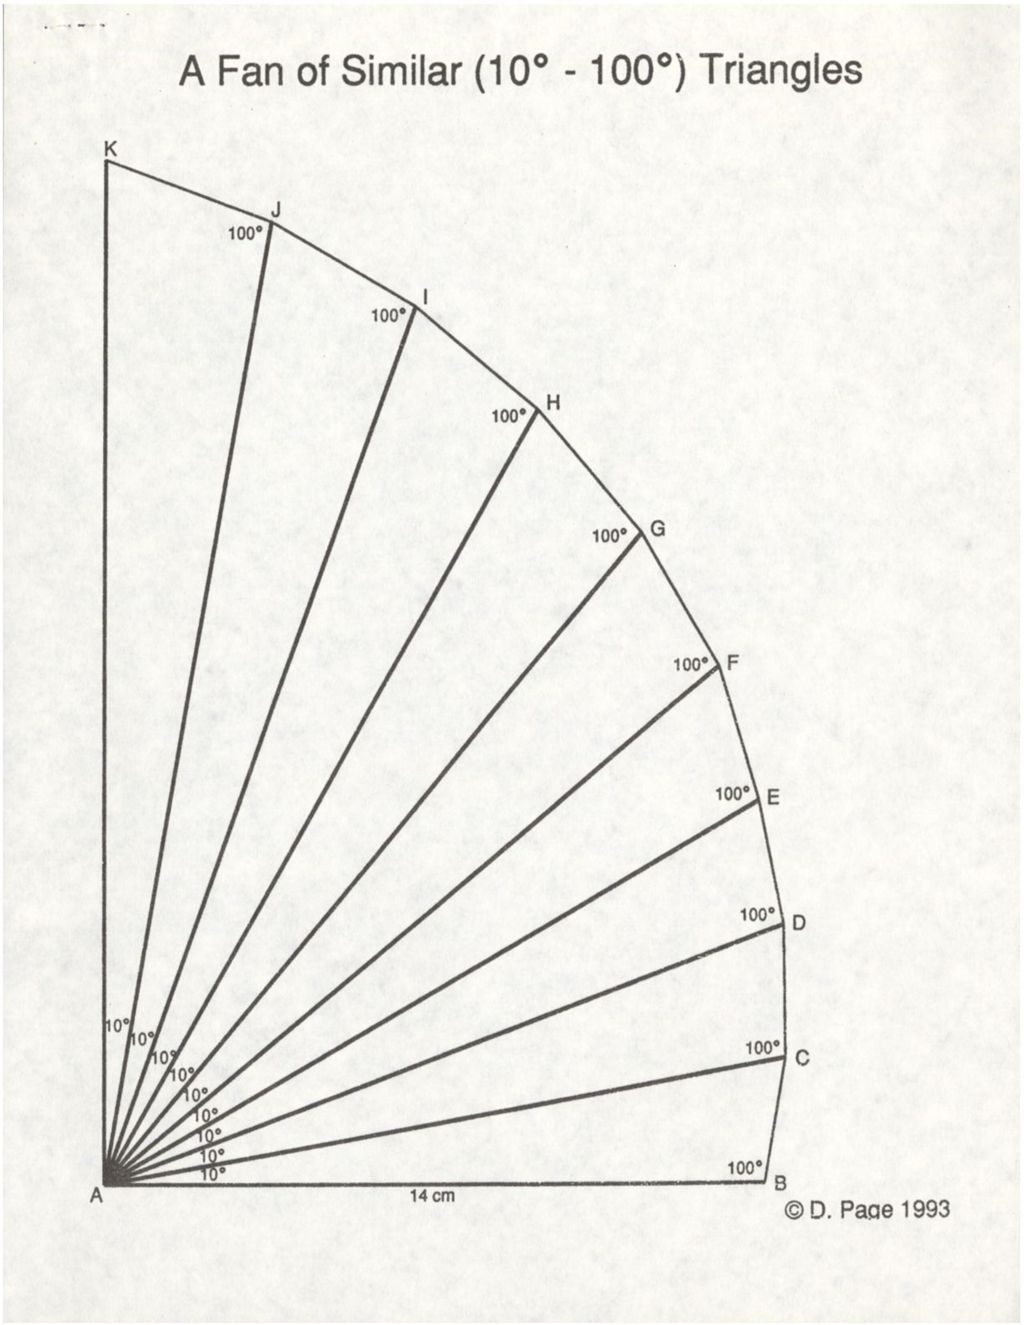 A Fan of Similar (10 degree – 100 degree) Triangles (image and instructions)